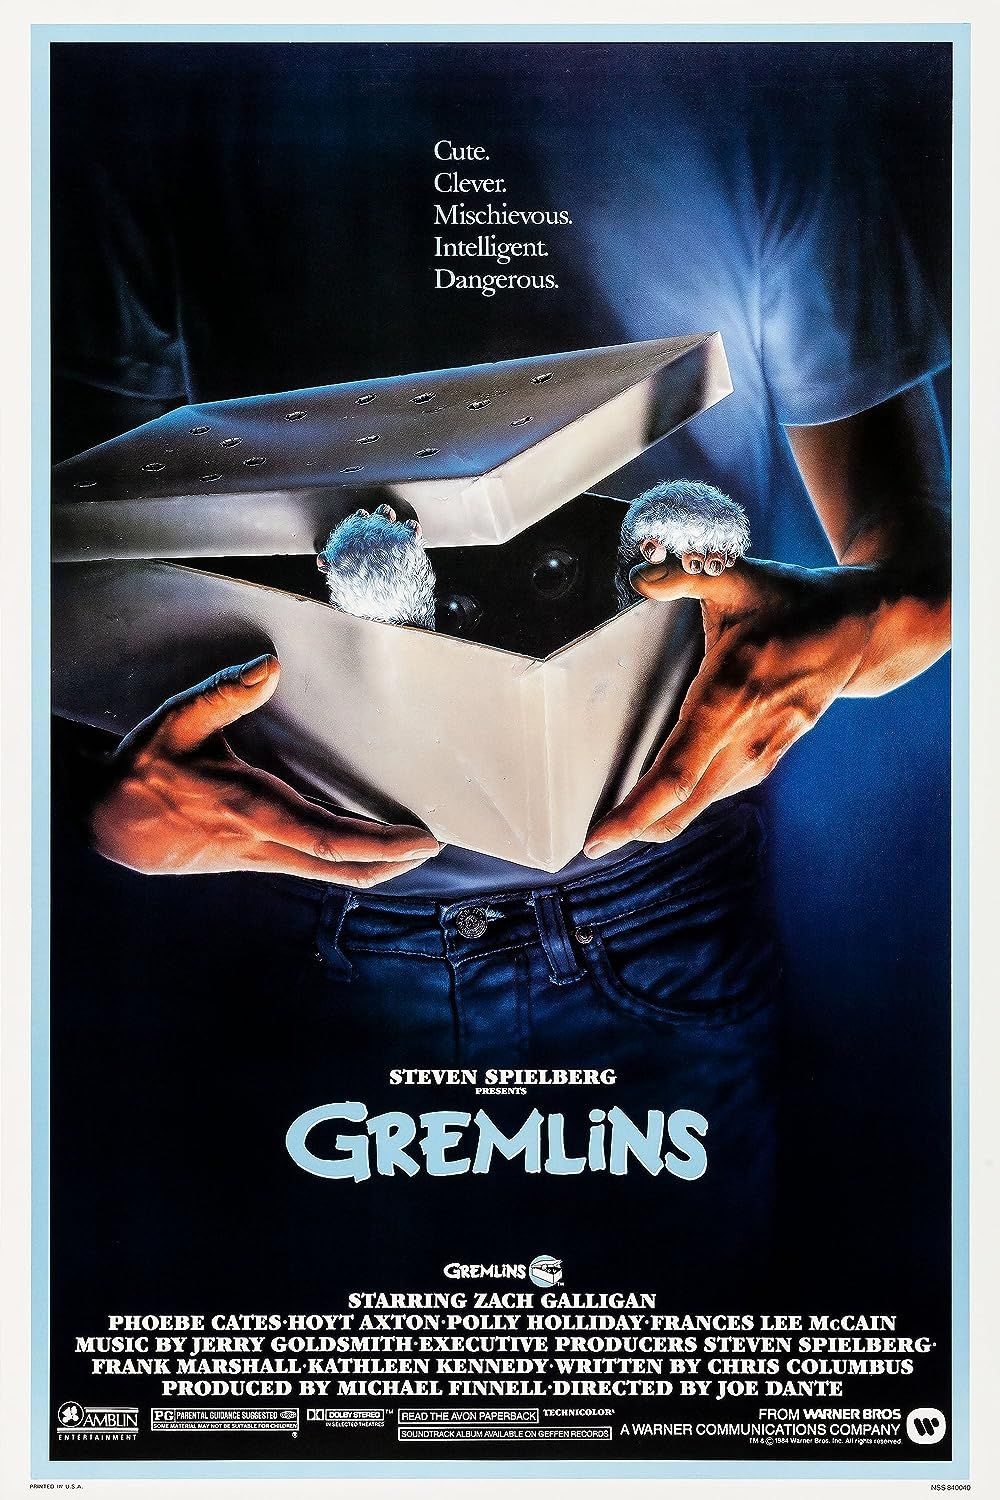 Gizmo Peeking Out of the Box in Gremlins Poster